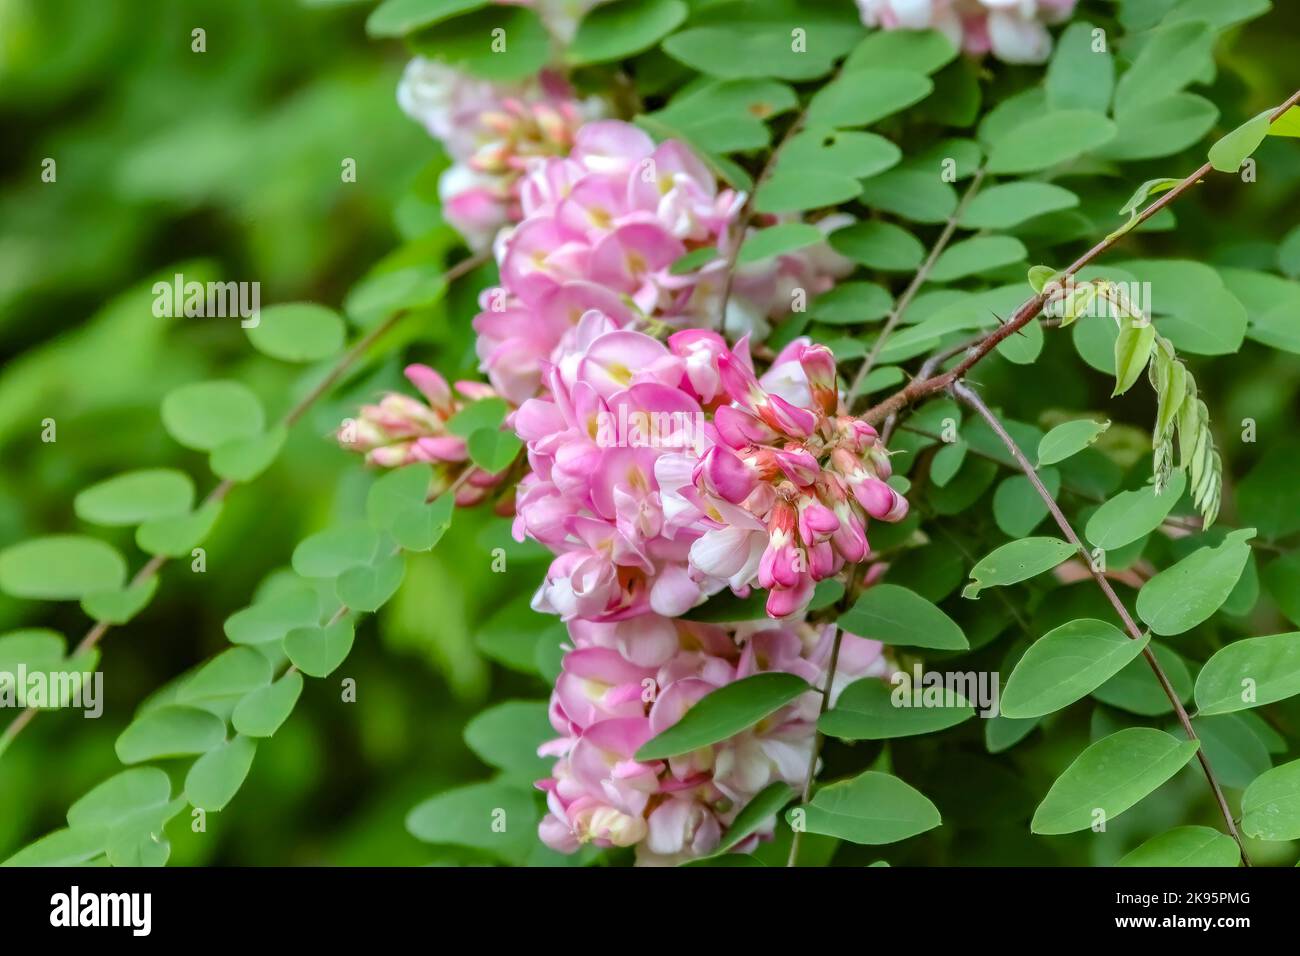 A closeup shot of Robinia hispida plant with green leaves and blurred background Stock Photo